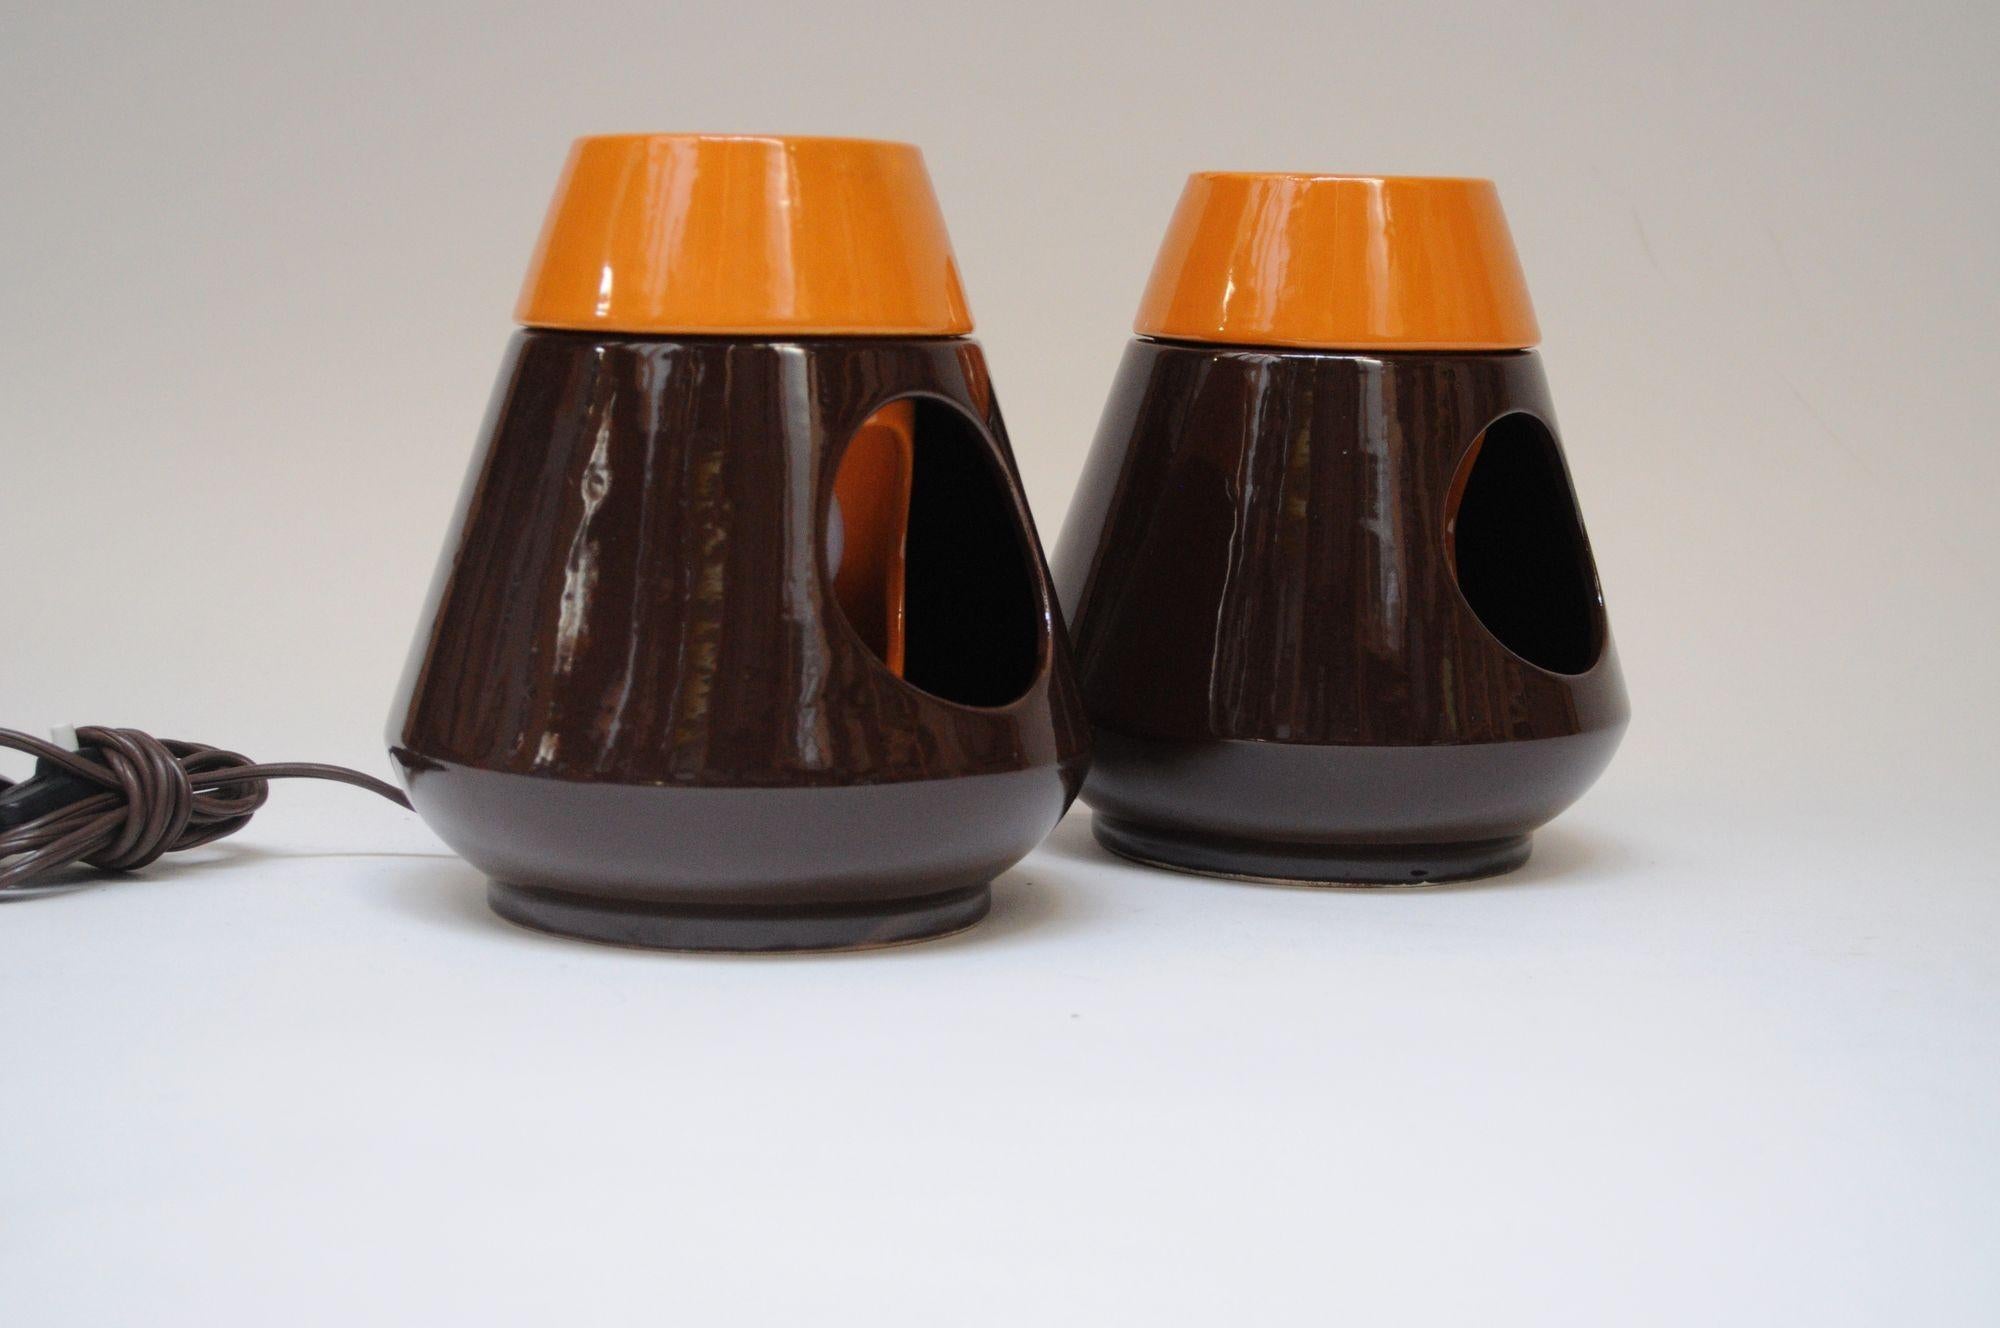 Vintage Italian Modern Ceramiche Capodarco Orange and Brown Bedside/Table Lamps In Good Condition For Sale In Brooklyn, NY